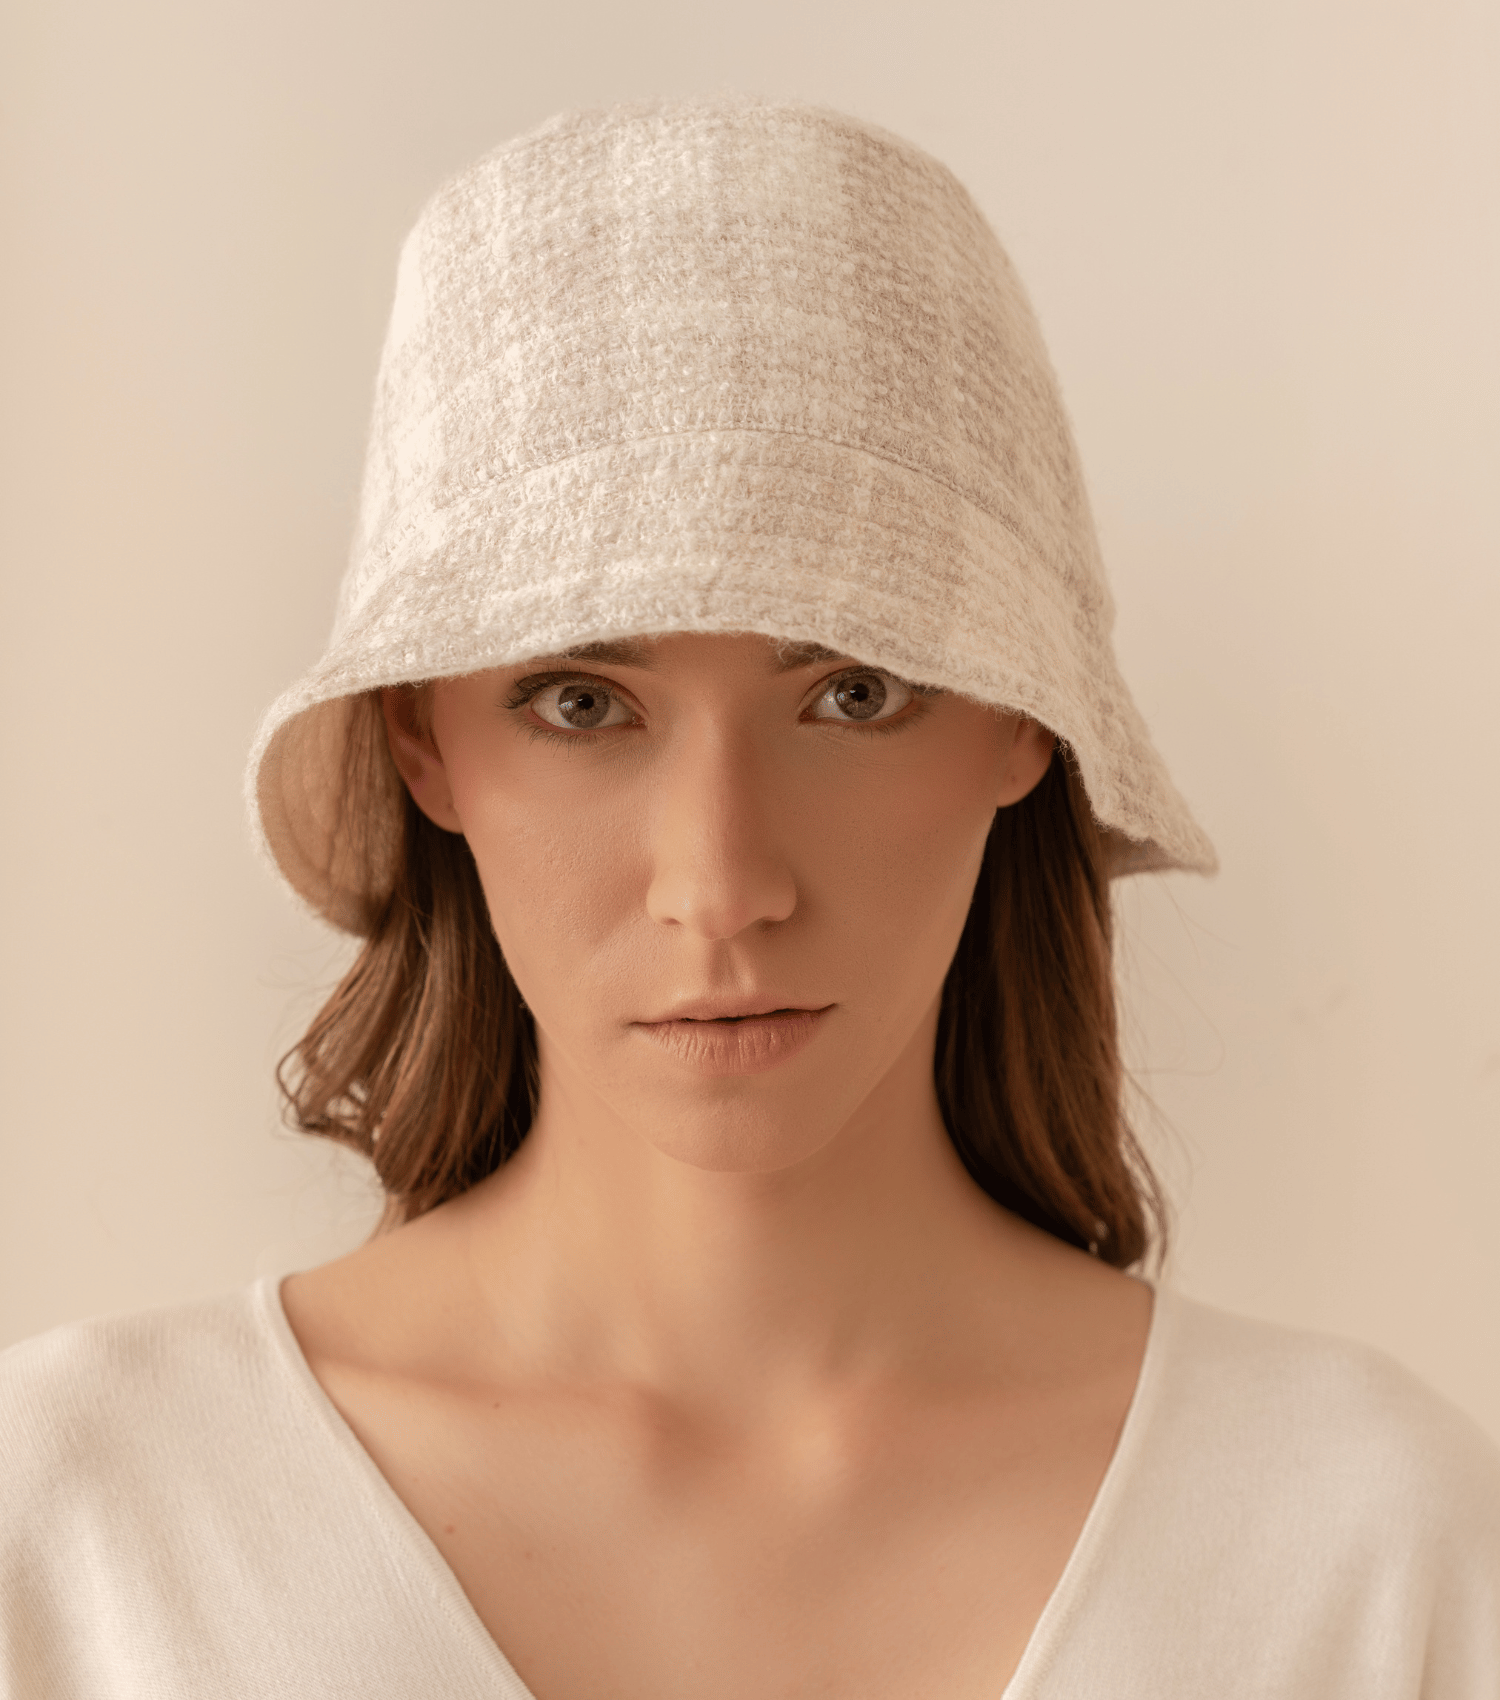 Reversible Baby Alpaca Bucket Hat - Plaid Ivory and Beige / Yvory